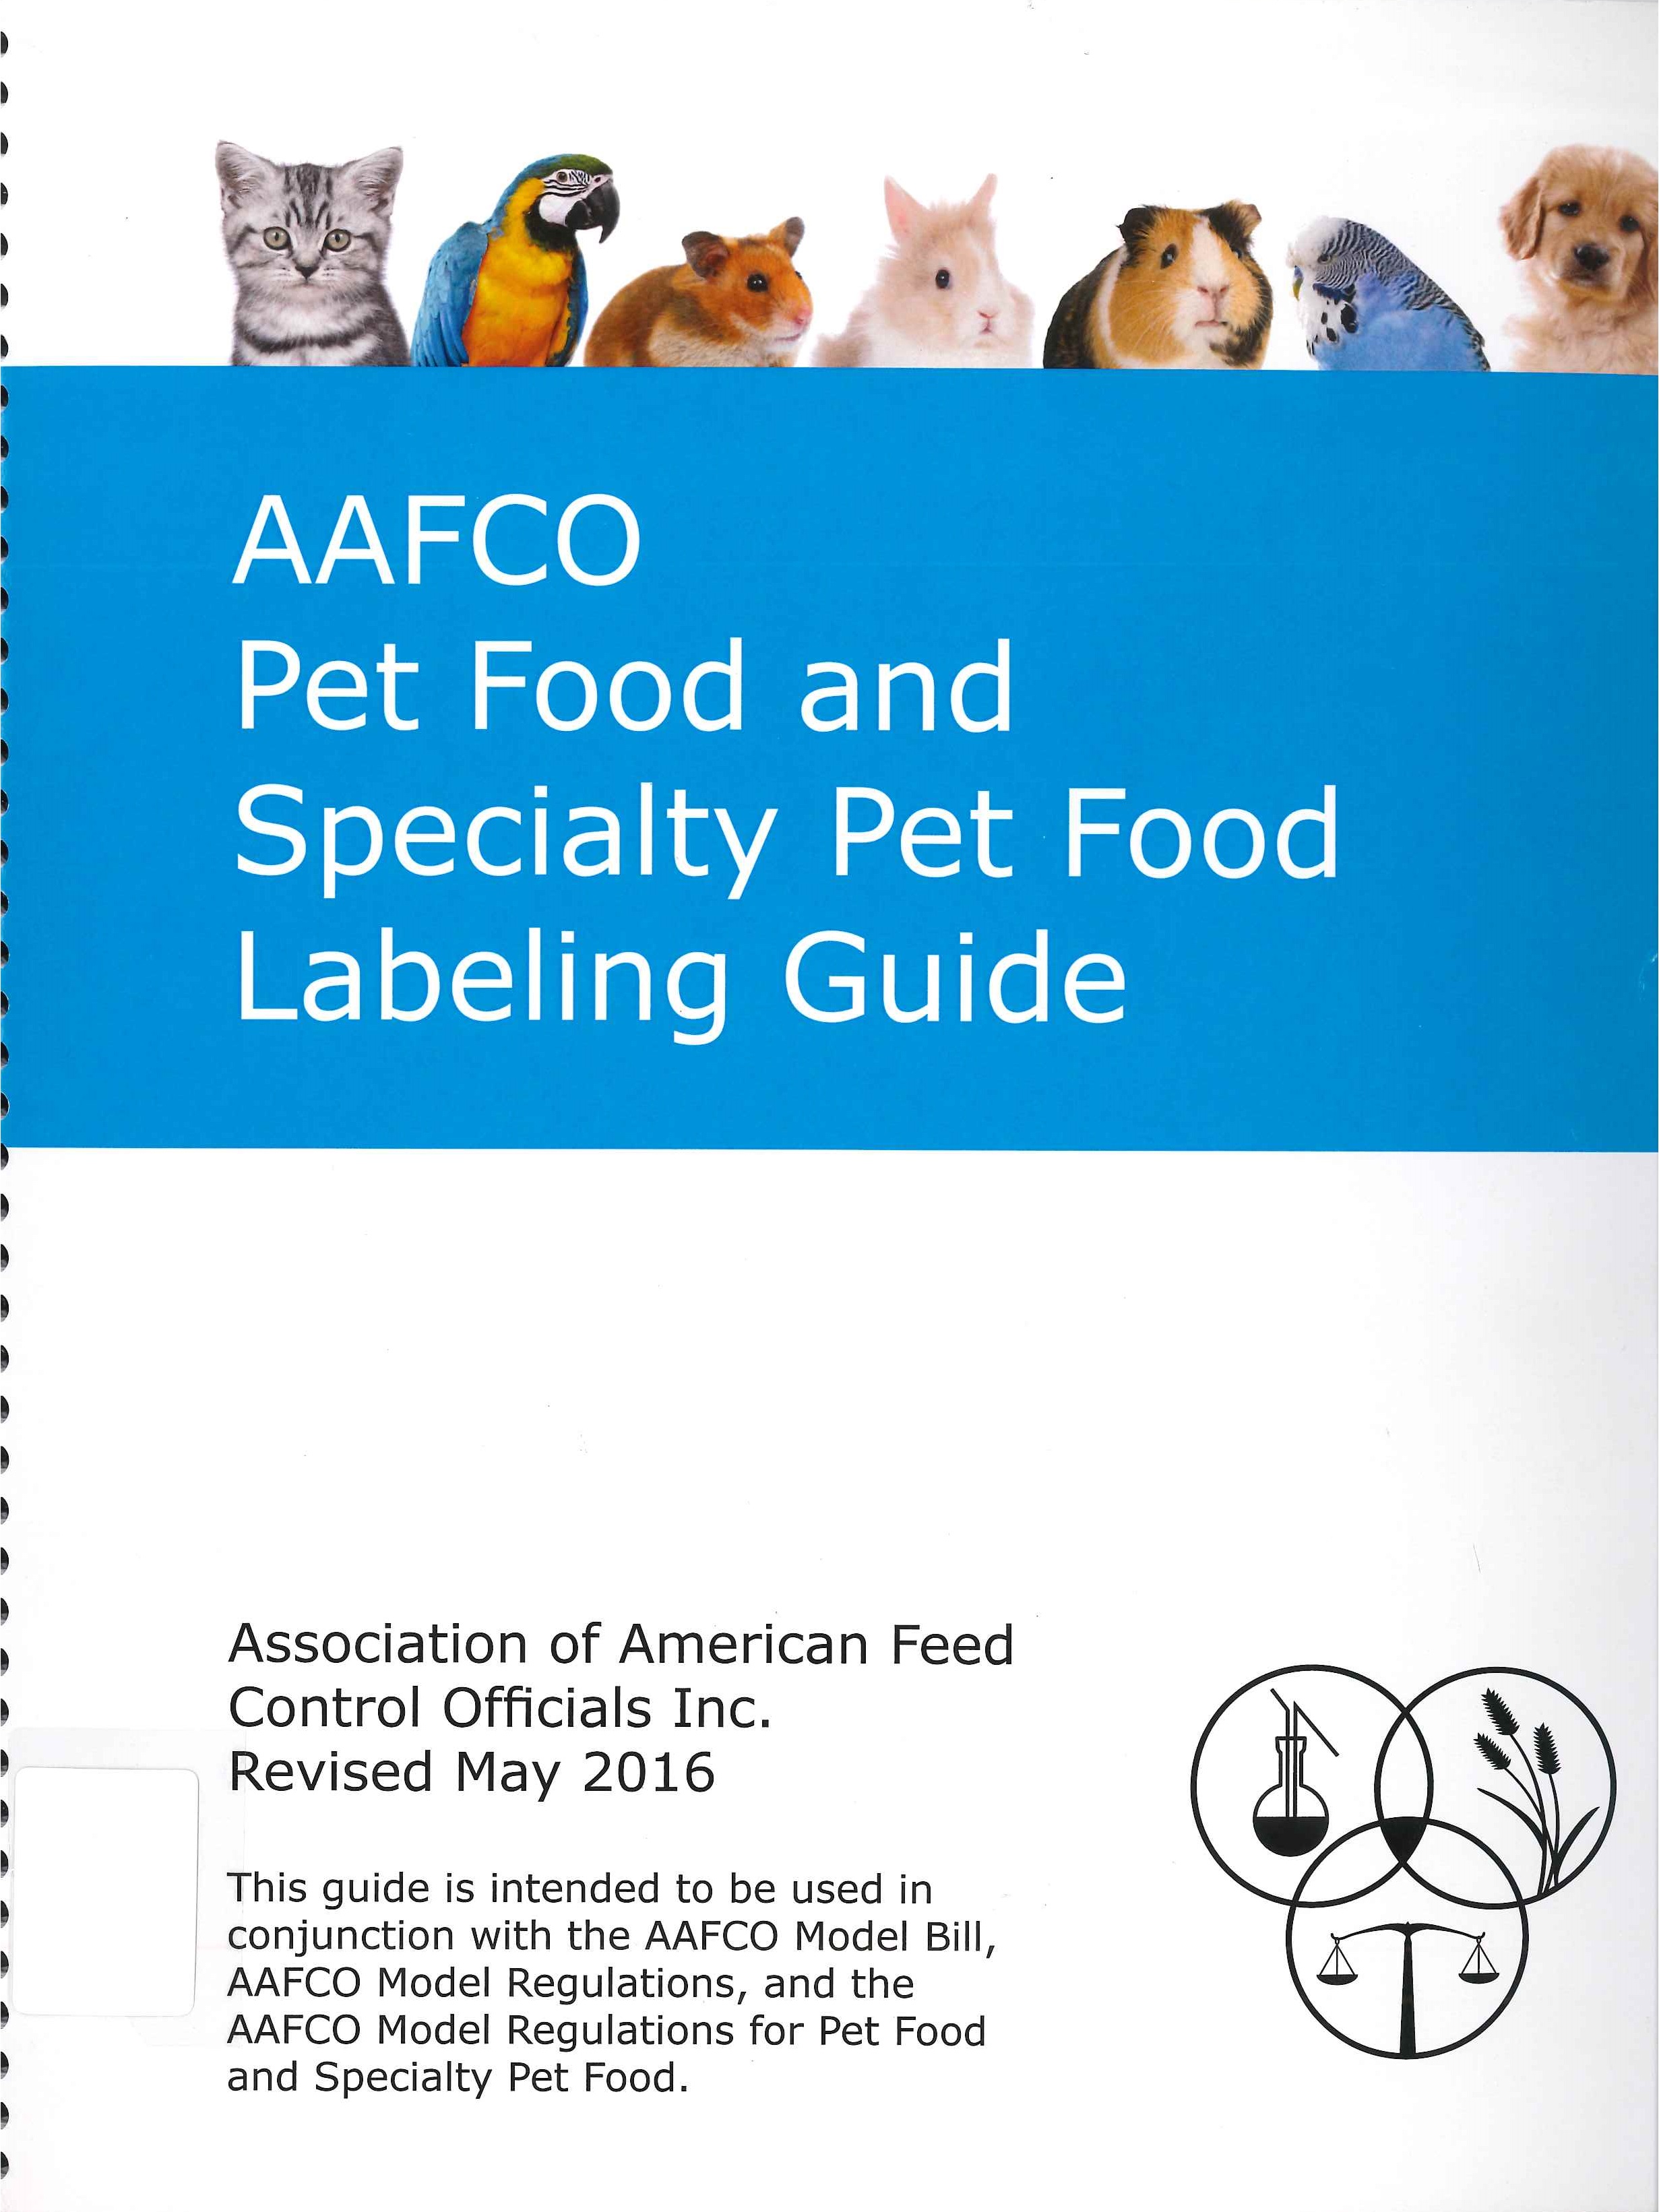 AAFCO pet food and specialty pet food labeling guide